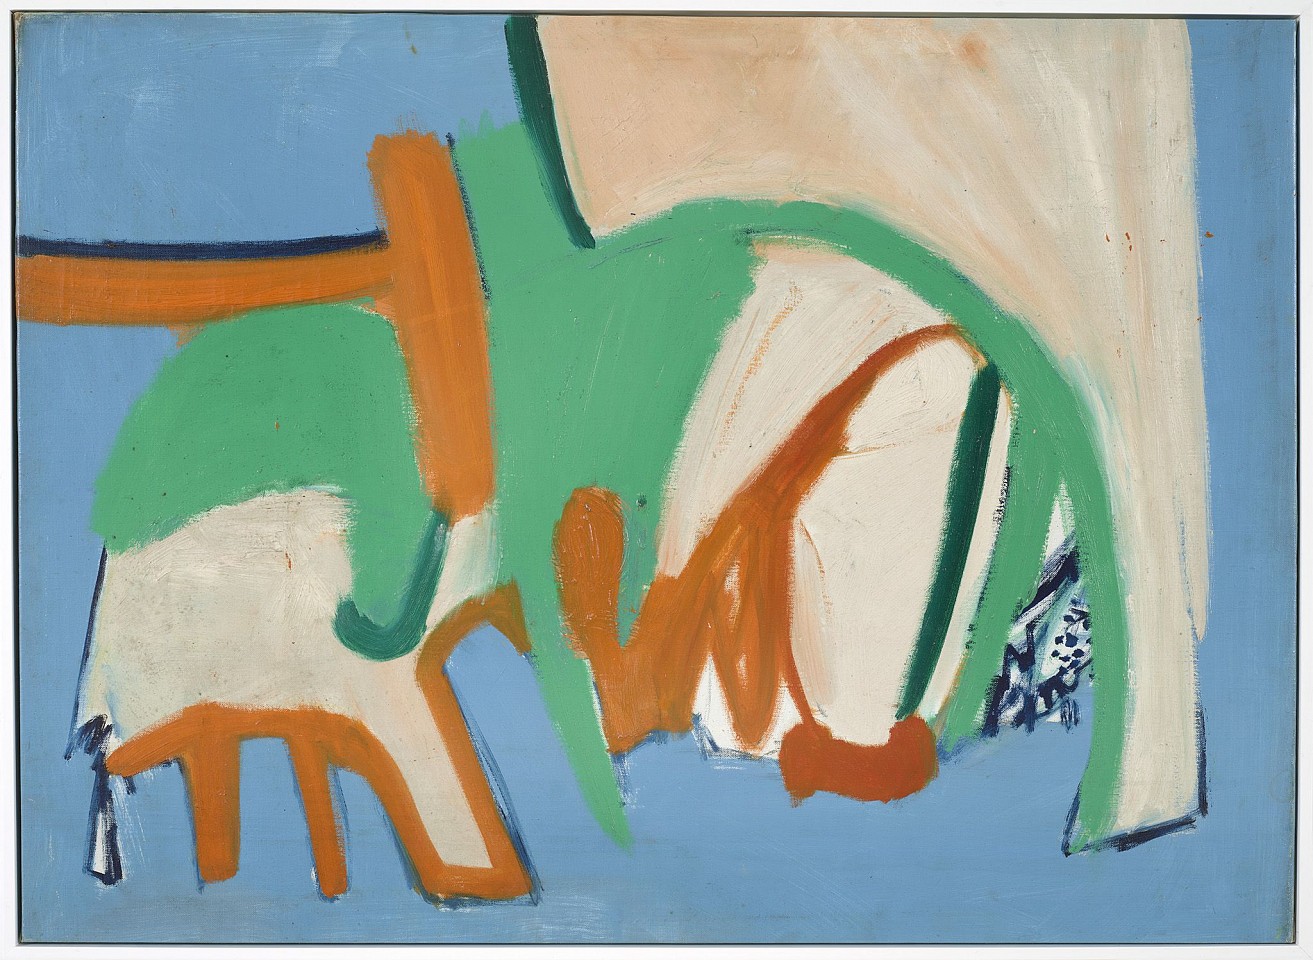 Yvonne Pickering Carter, Untitled, c. 1965
Oil on canvas, 25 3/4 x 35 5/8 in. (65.4 x 90.5 cm)
YPC-00015